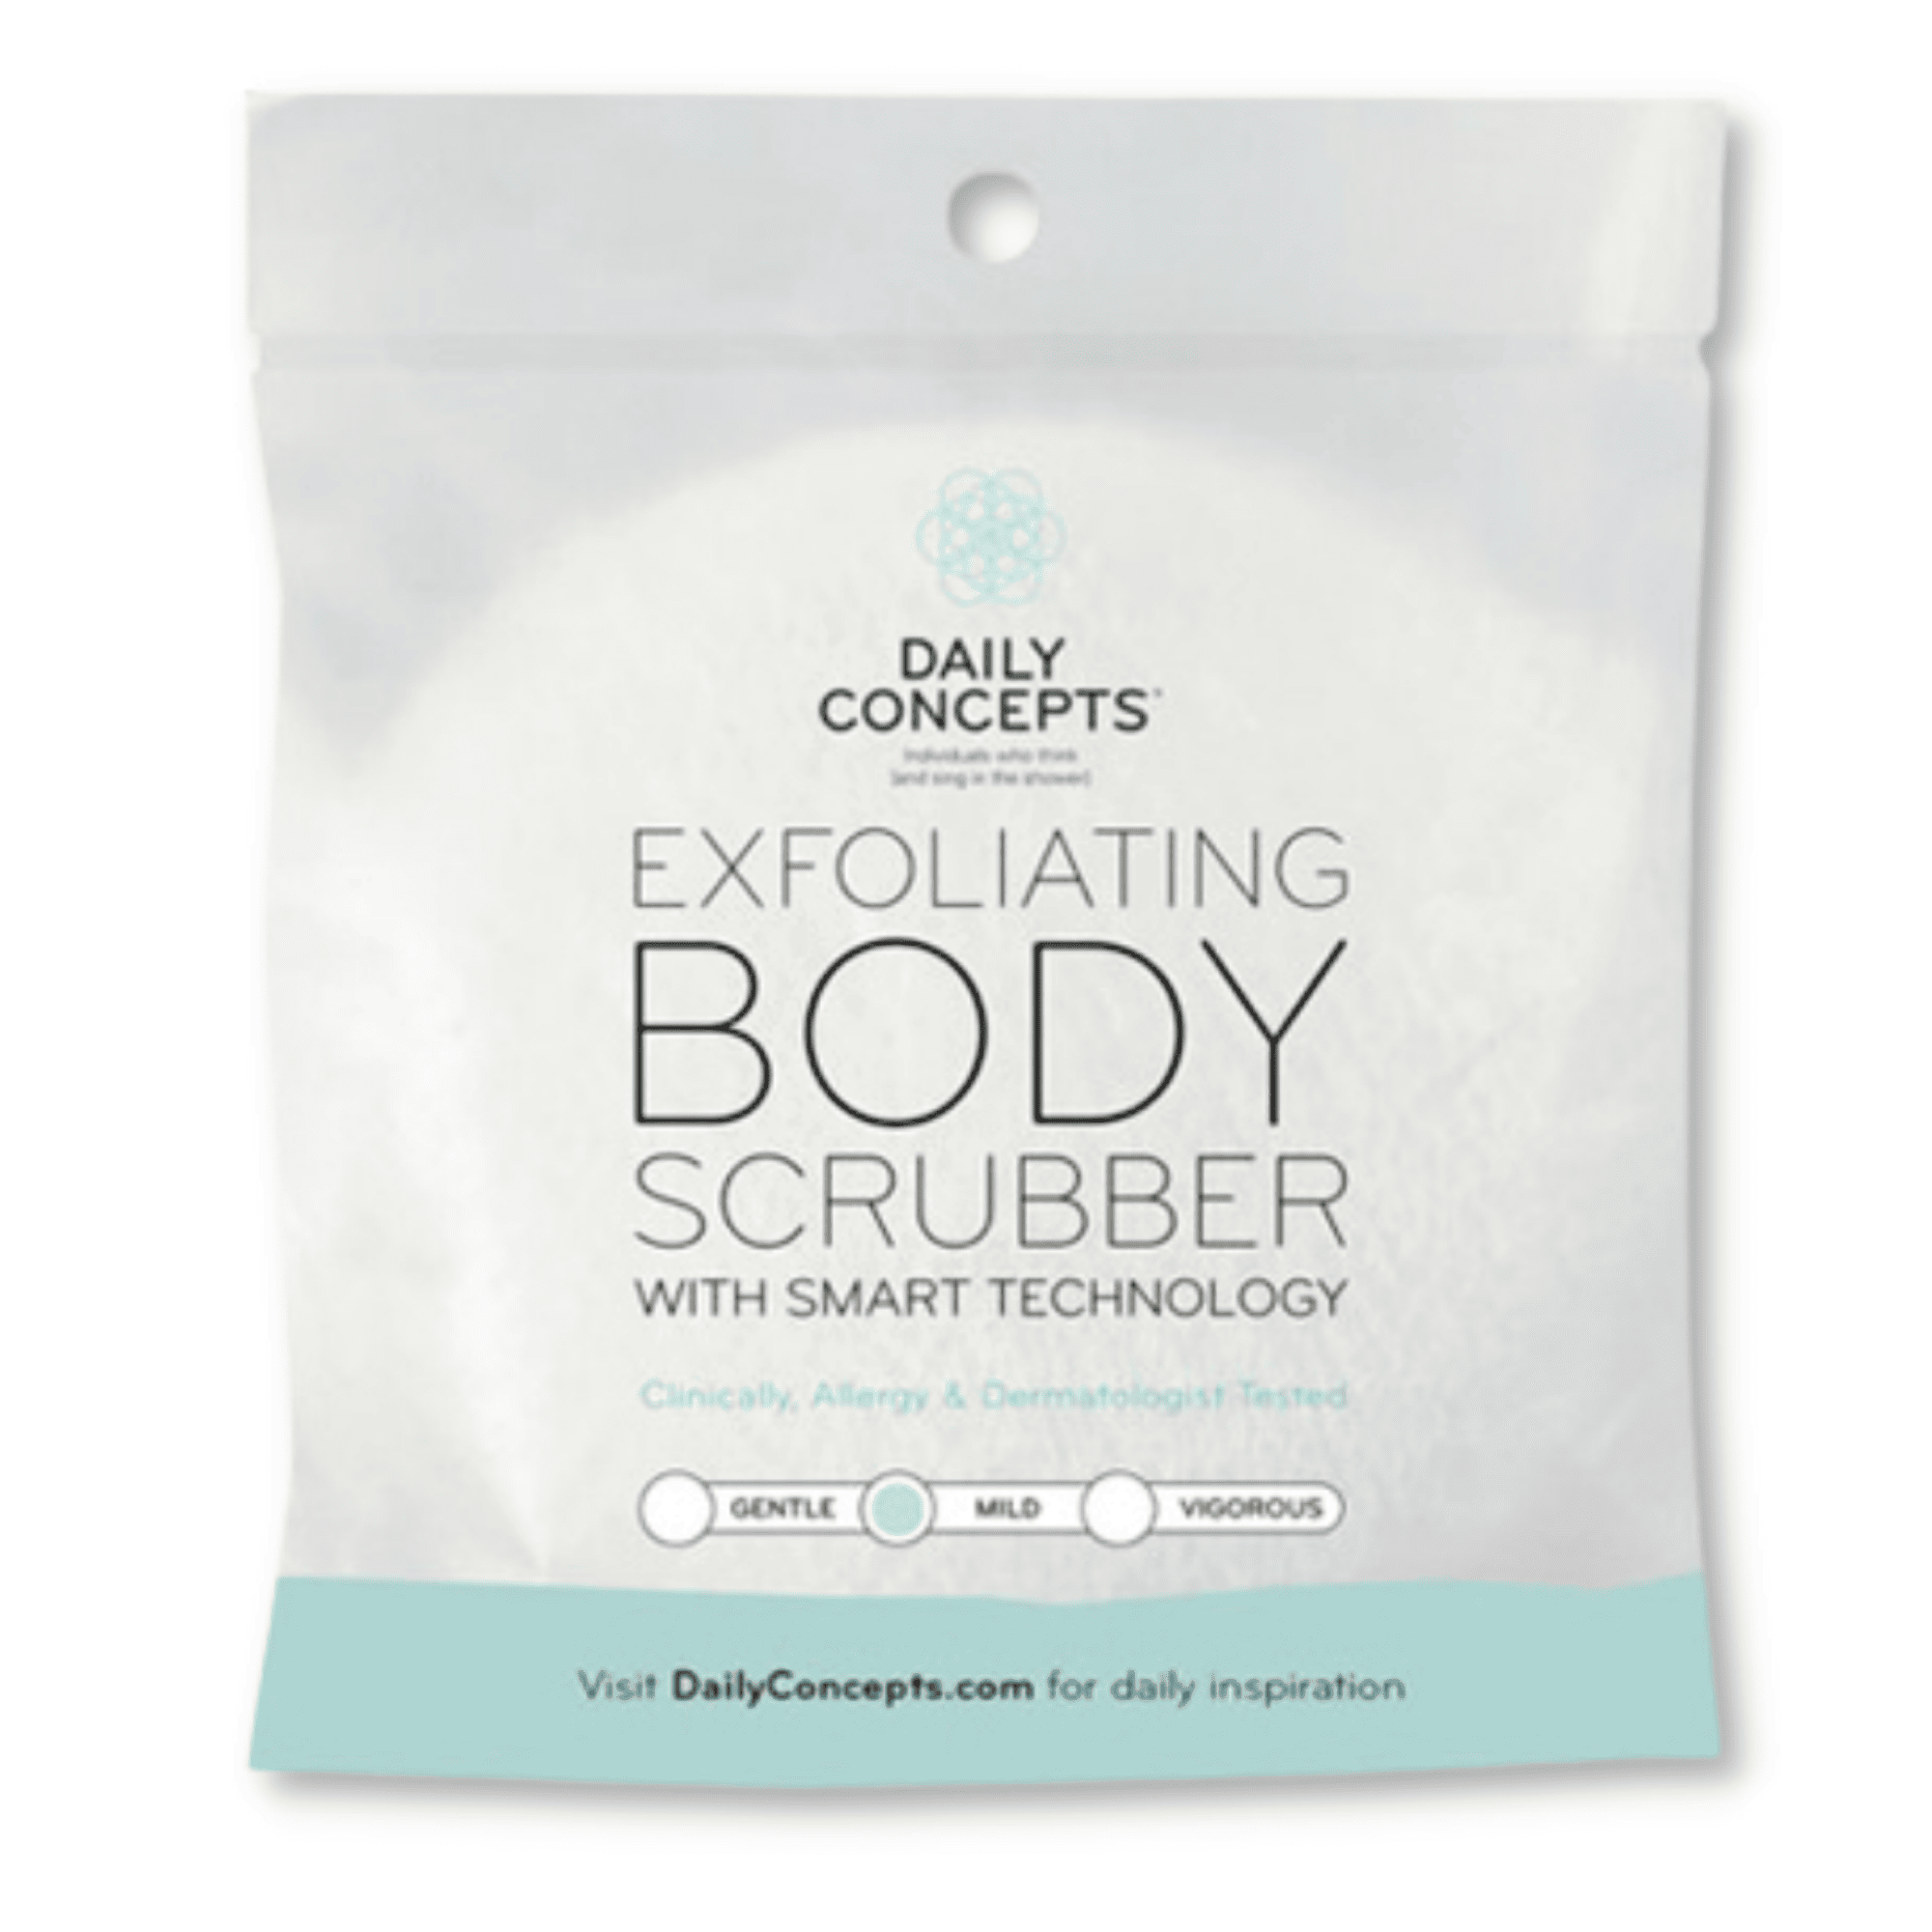 DAILY CONCEPTS EXFOLIATING BODY SCRUBBER